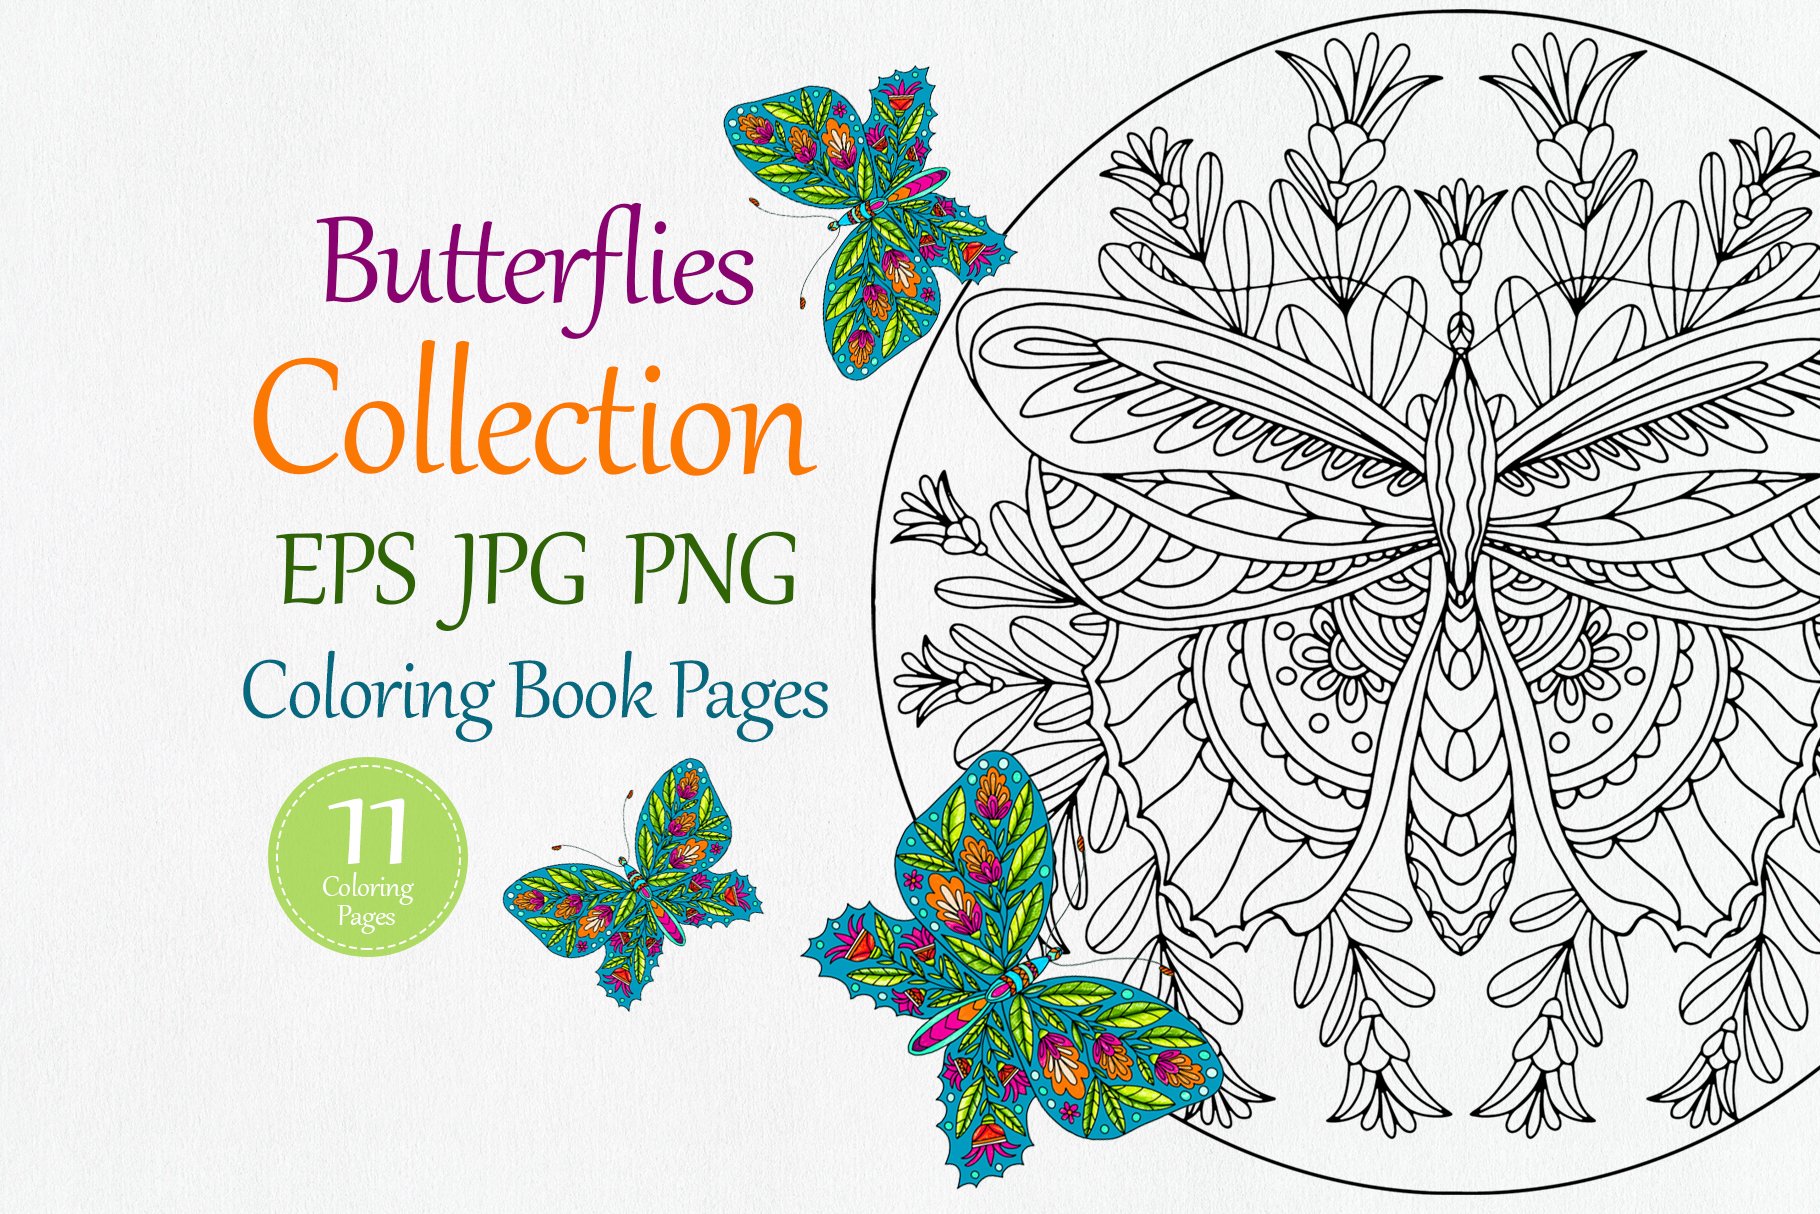 Mandala collection of butterfliescover image.